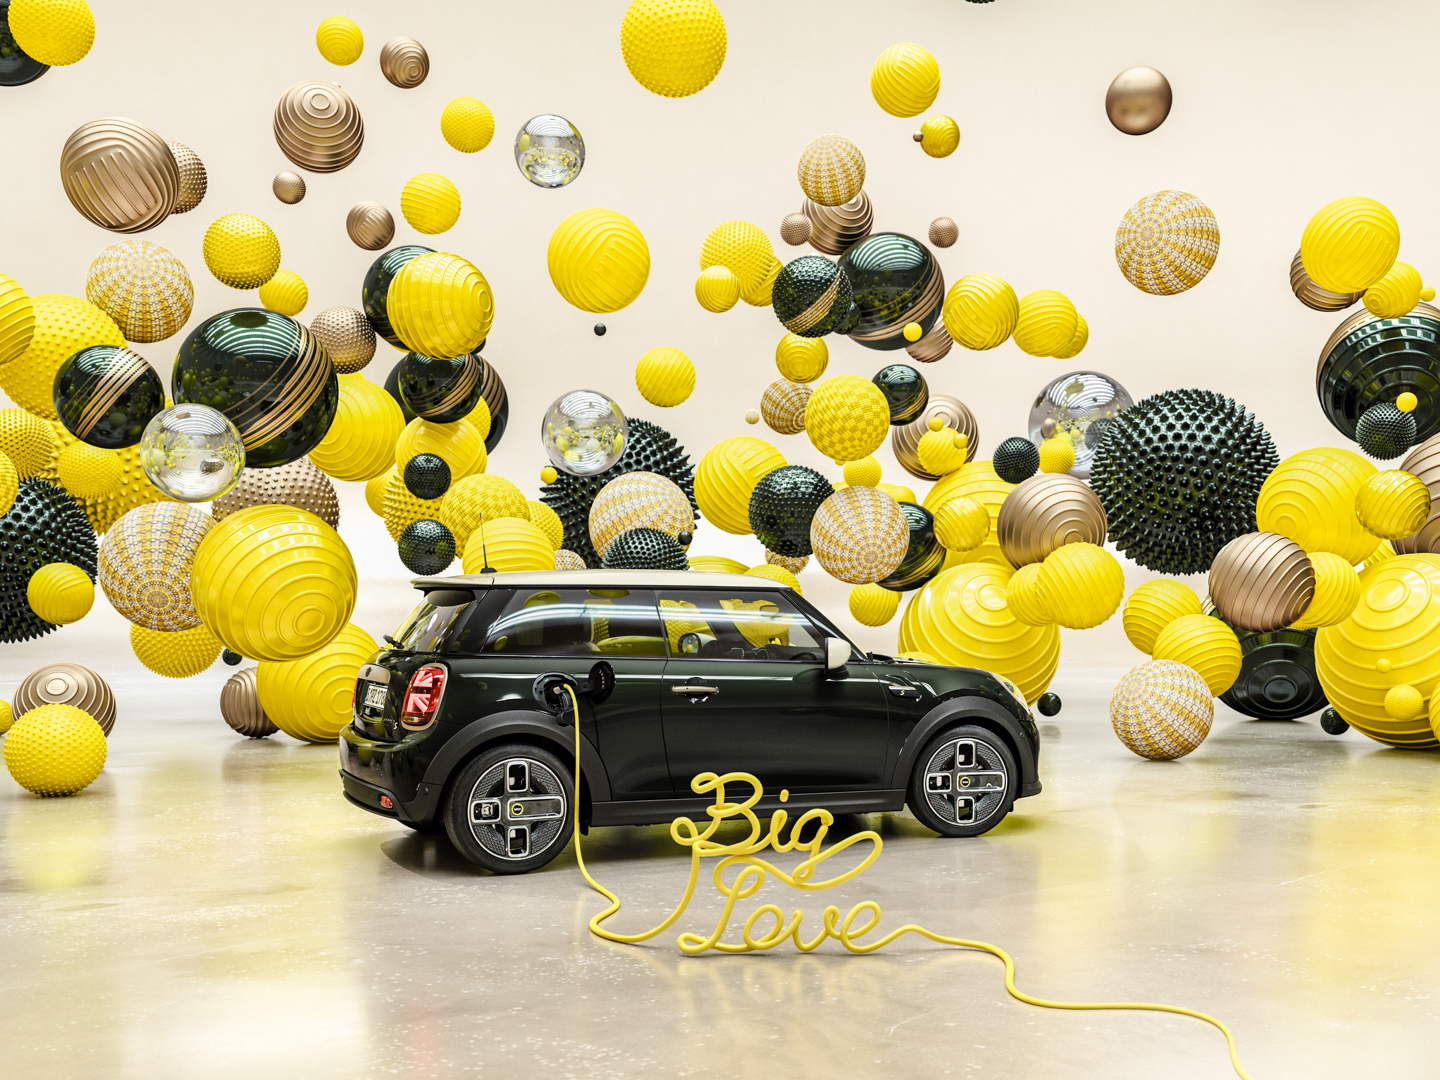 International BIG LOVE launch campaign for the new MINI Edition models